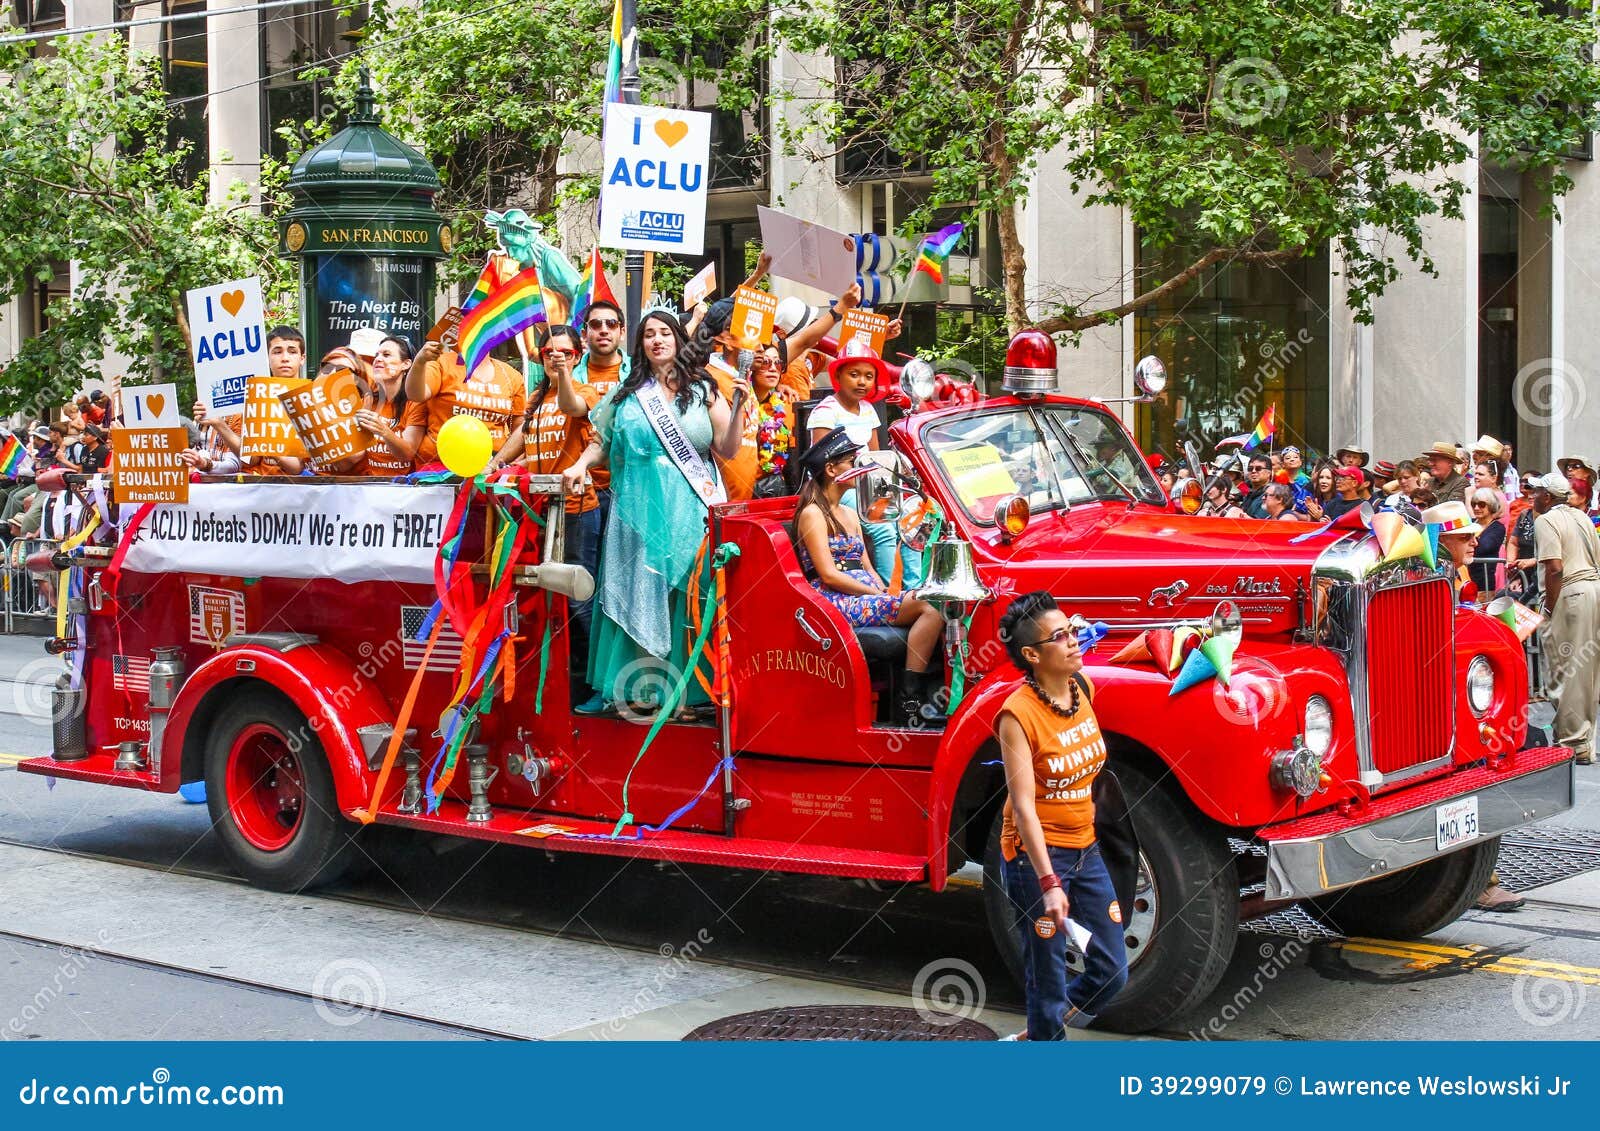 Marching in SF Pride parade is only the first step - The 